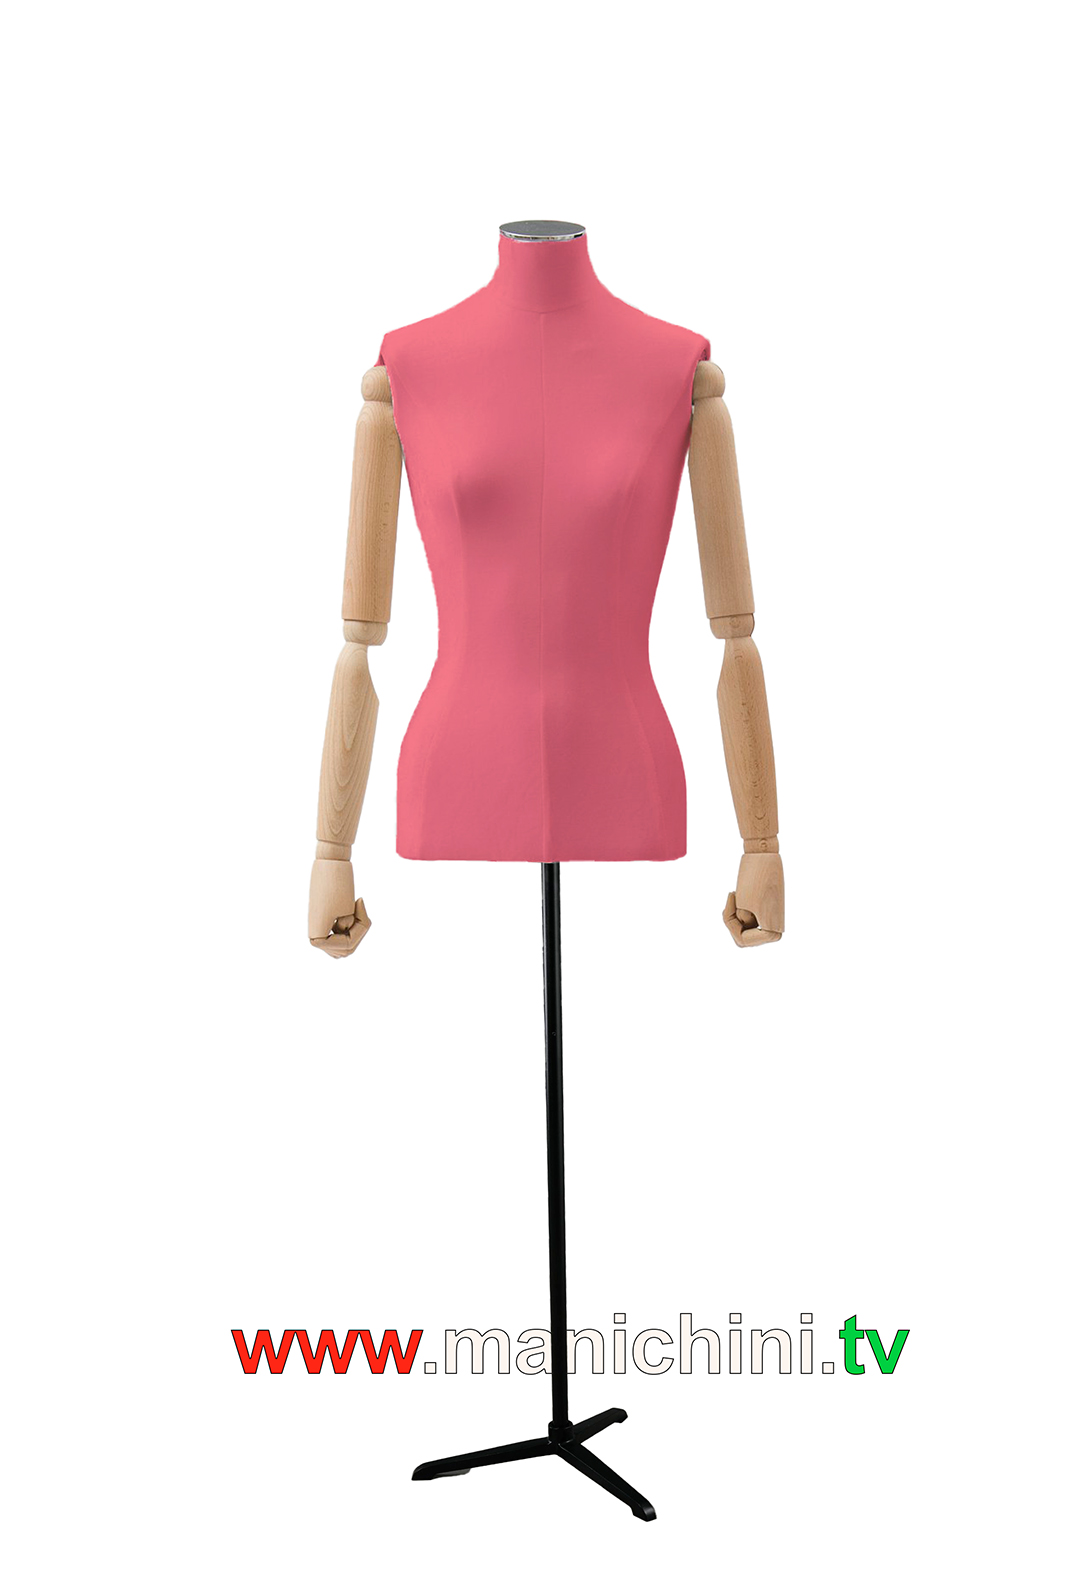 Velvet Upholstered Busts Bust Woman Tailored Pink Wooden Arms with Head